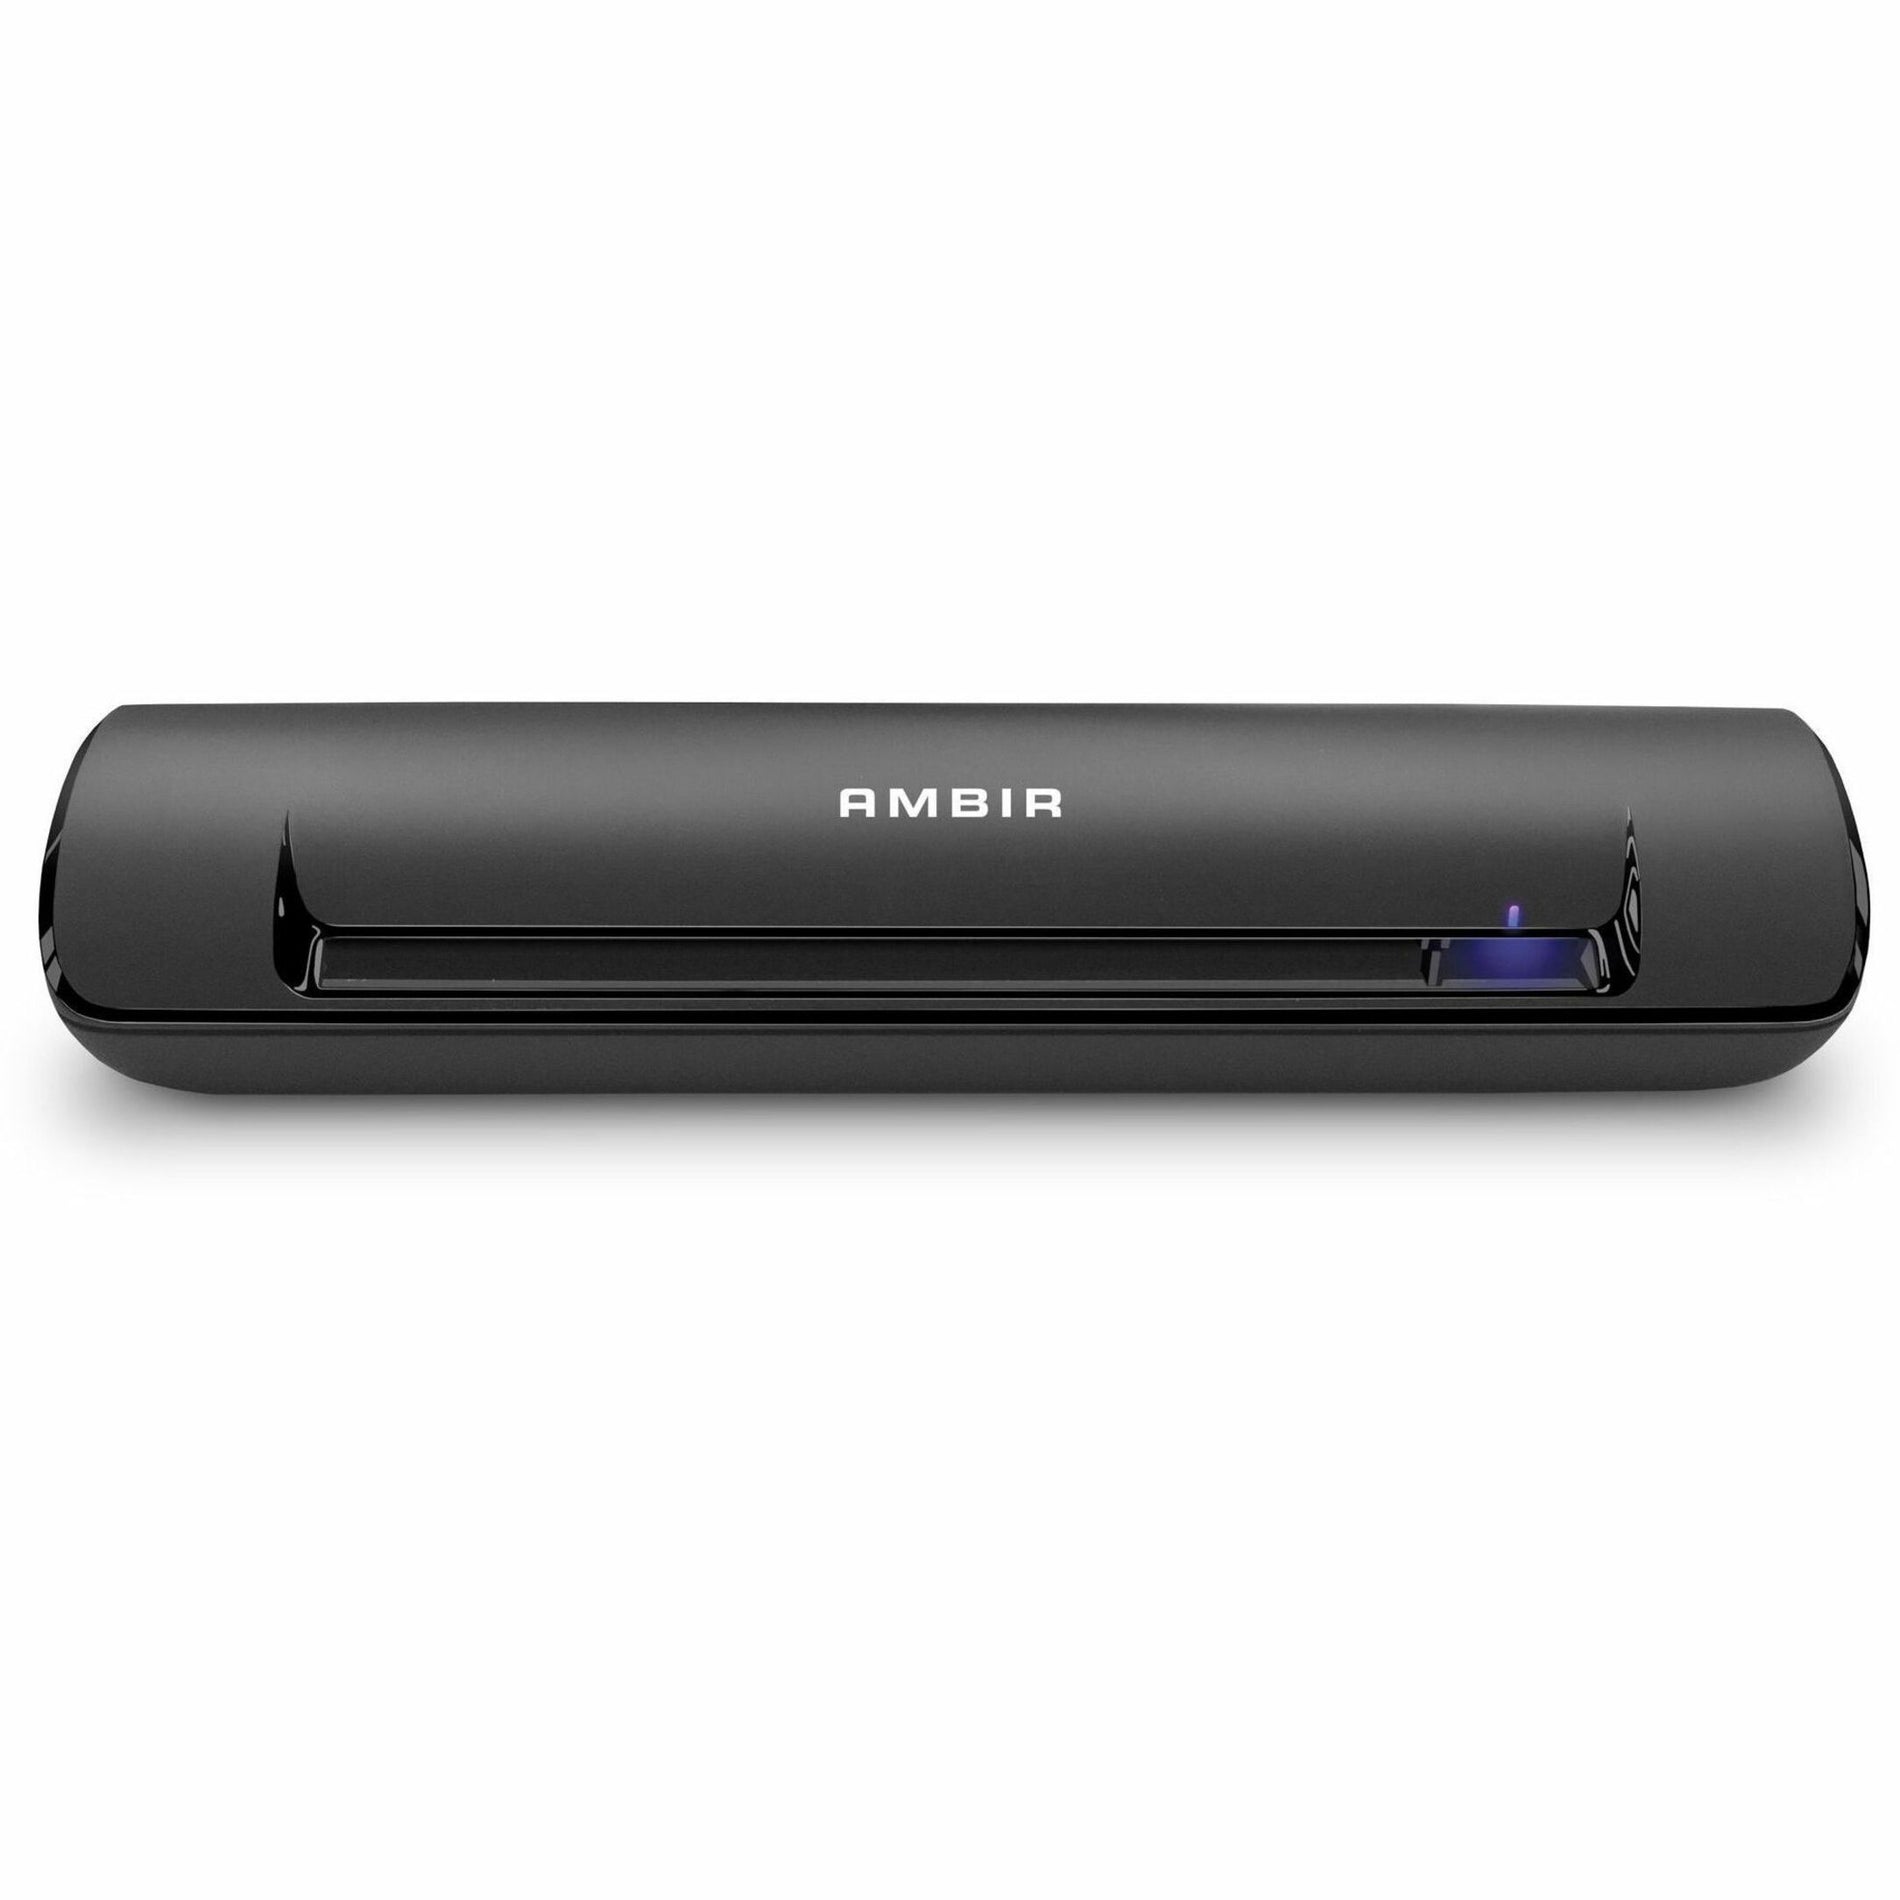 Ambir DS490-AS ImageScan Pro 490i Duplex Document Scanner with AmbirScan, Portable Sheetfed Scanner for Windows 10/8/7, 2 Year Warranty